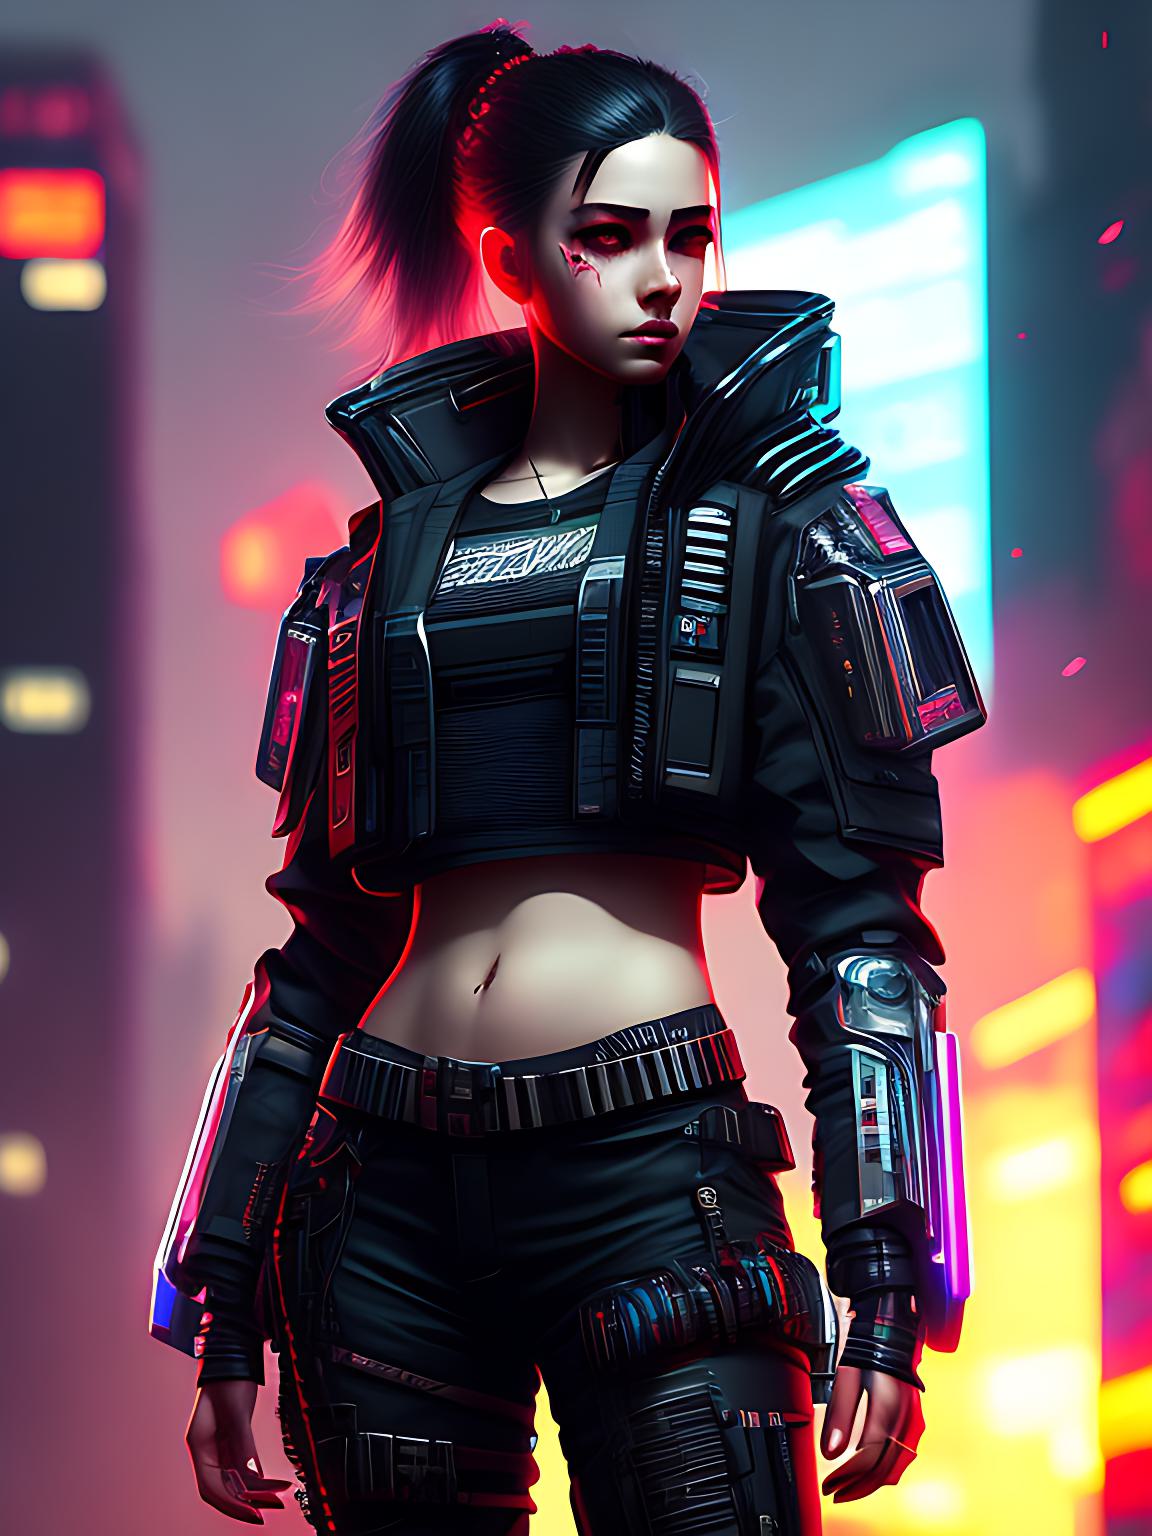 cyberpunk female character concept art generated by fotor ai concept art creator from text